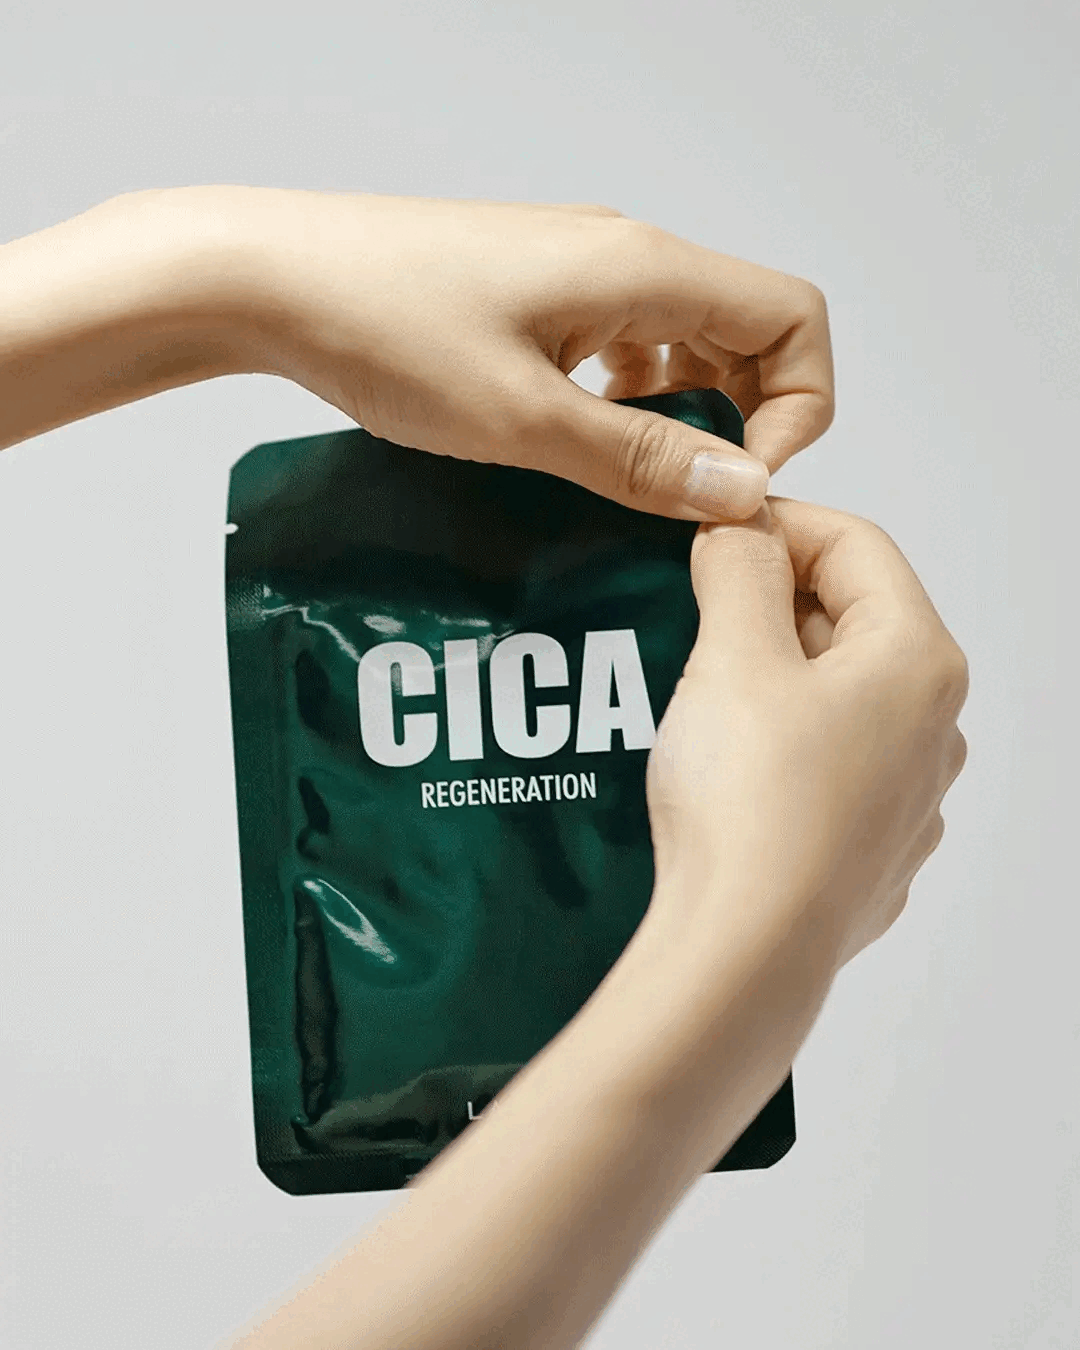 Model removes a Cica Regeneration sheet mask from dark green packet and unfolds it